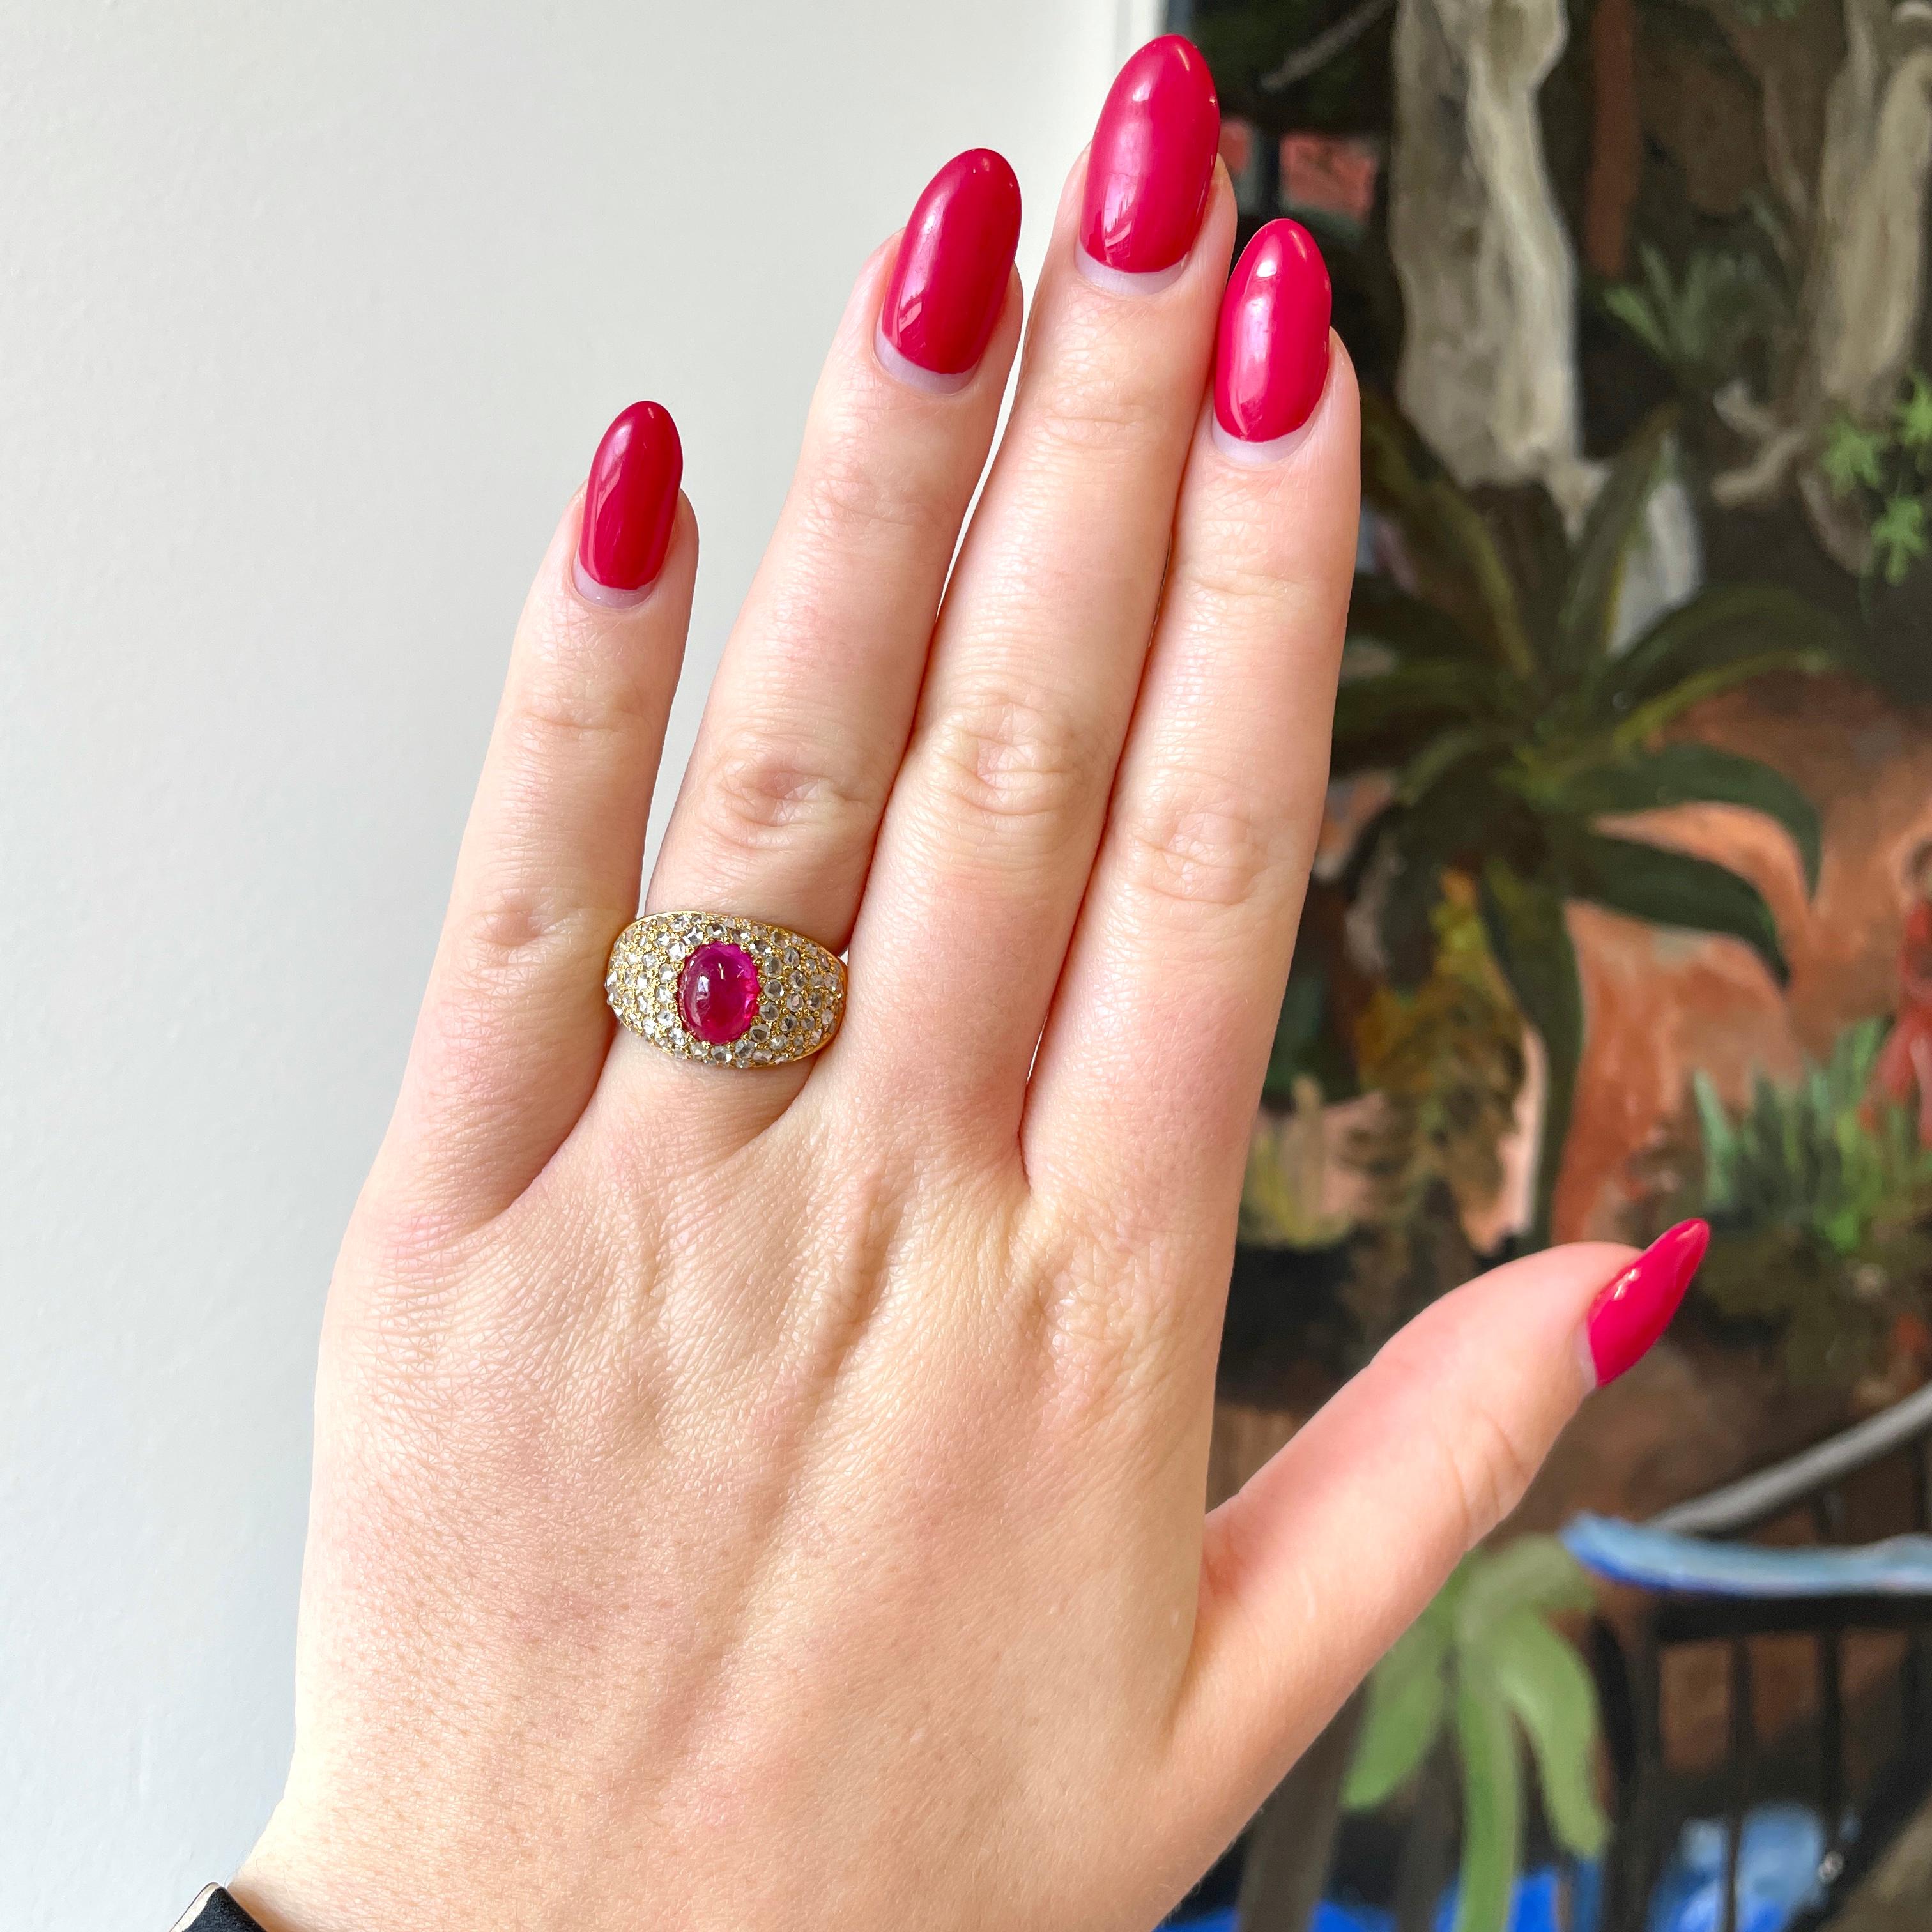 Would you agree that vibrant red ruby and sparkling yellow gold are the perfect combination of colors? This Retro GIA Burma Ruby Diamond 18k Gold Bombe Ring is powerful and irresistible. It features a GIA no heat Burma ruby approximately 2.50 carat.